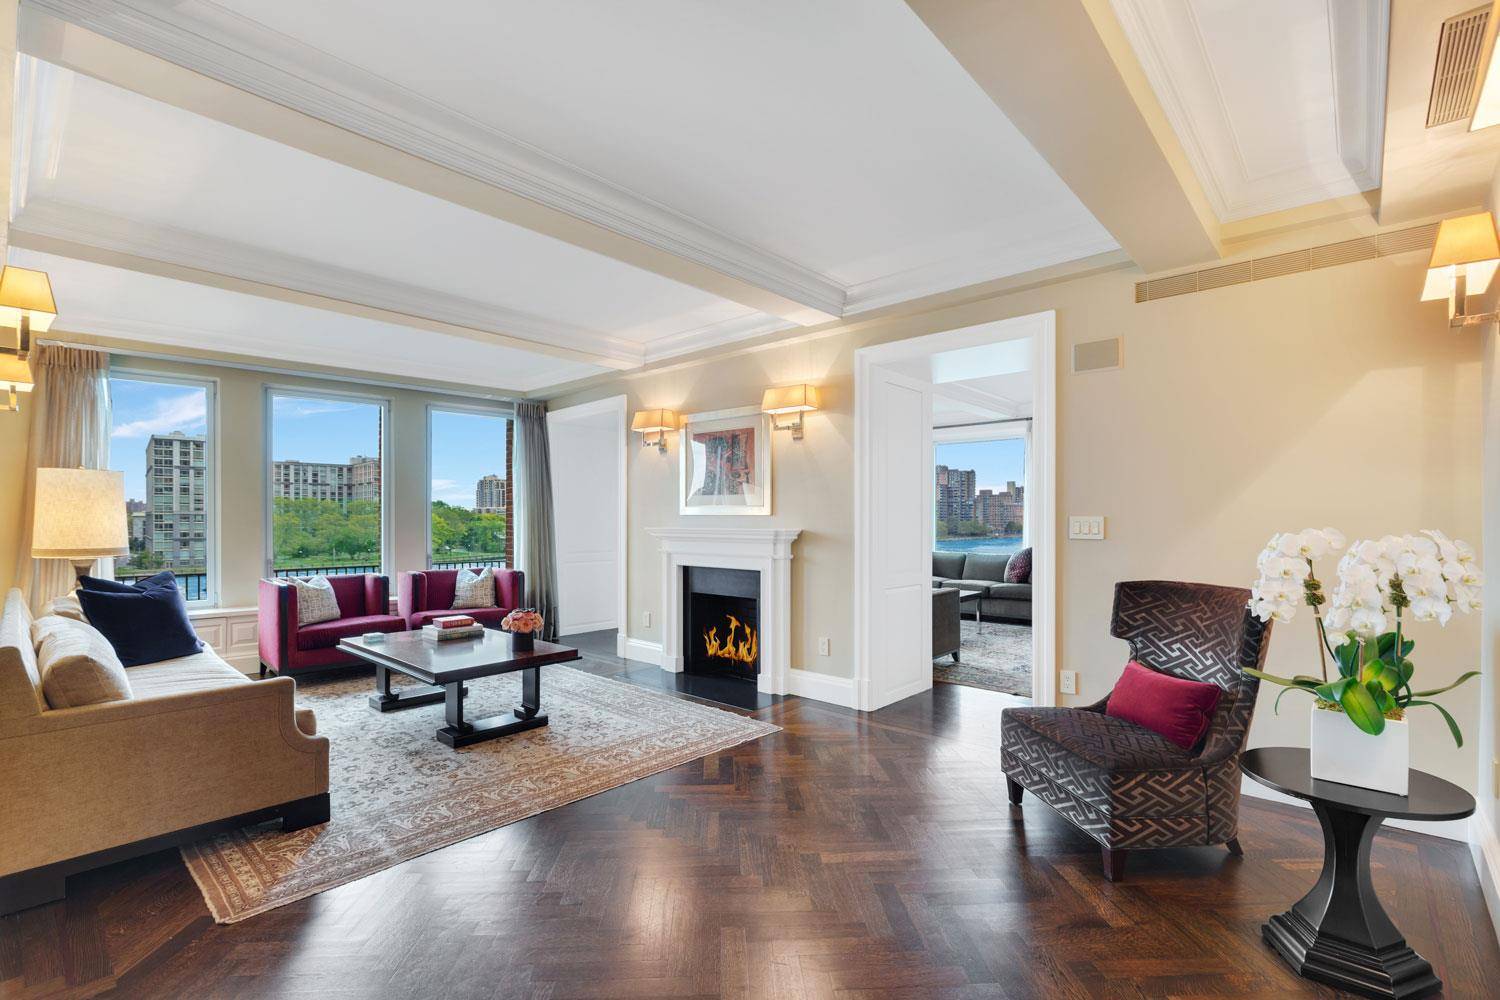 Meticulously designed and lavishly appointed, this sprawling mint condition residence overlooking the East River offers its residents the quintessential comfort, elegance, luxury and sophistication.